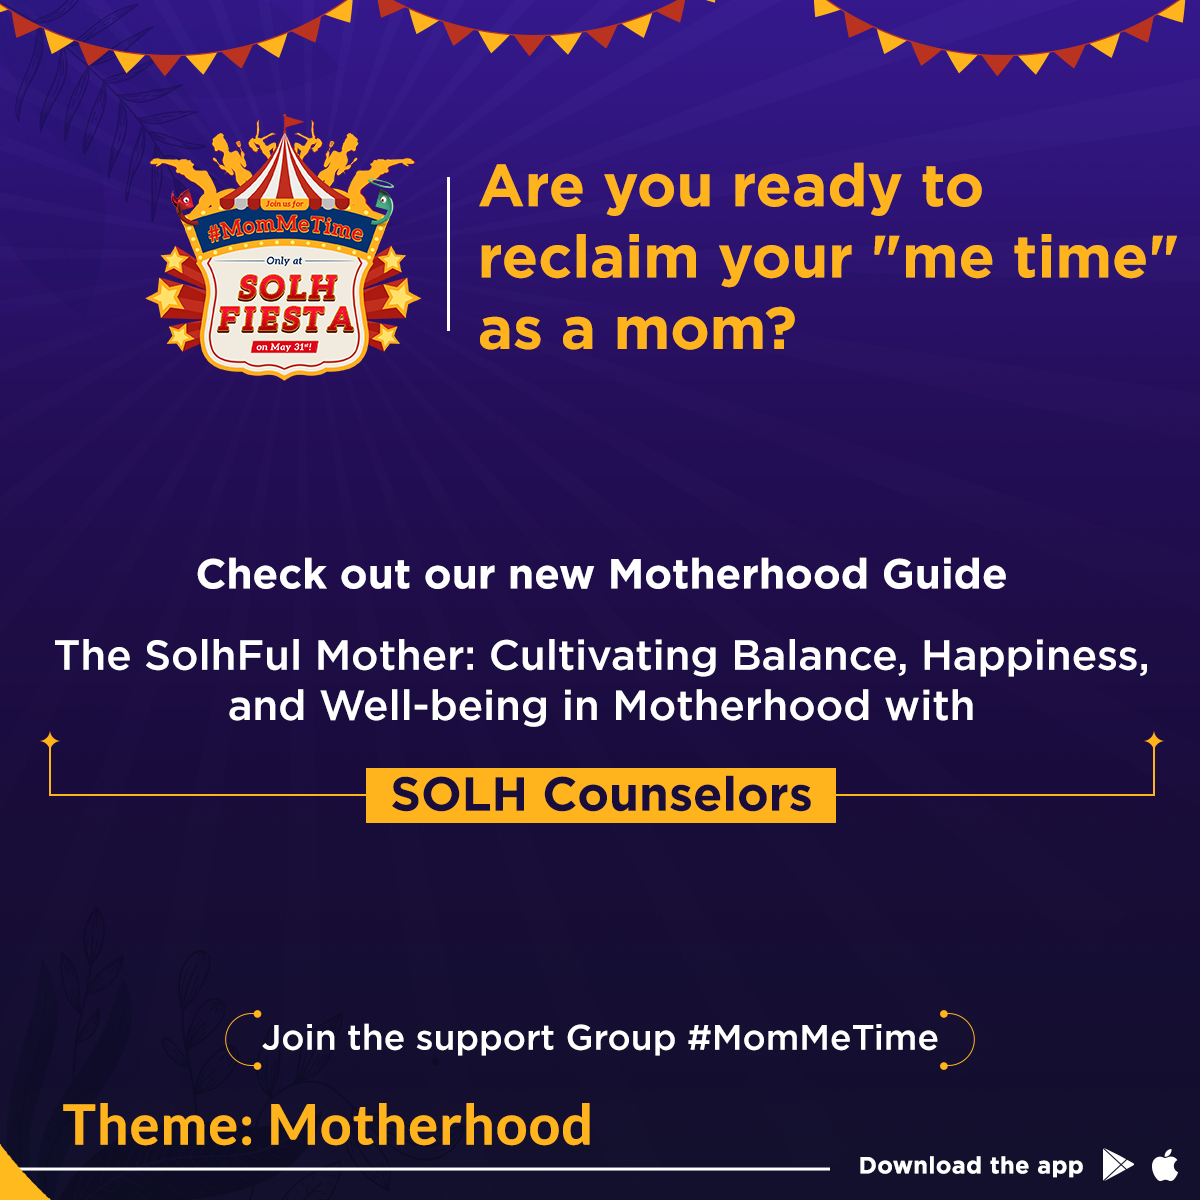 Motherhood Guide by Solh Counselors  Solh Fiesta, Online Event